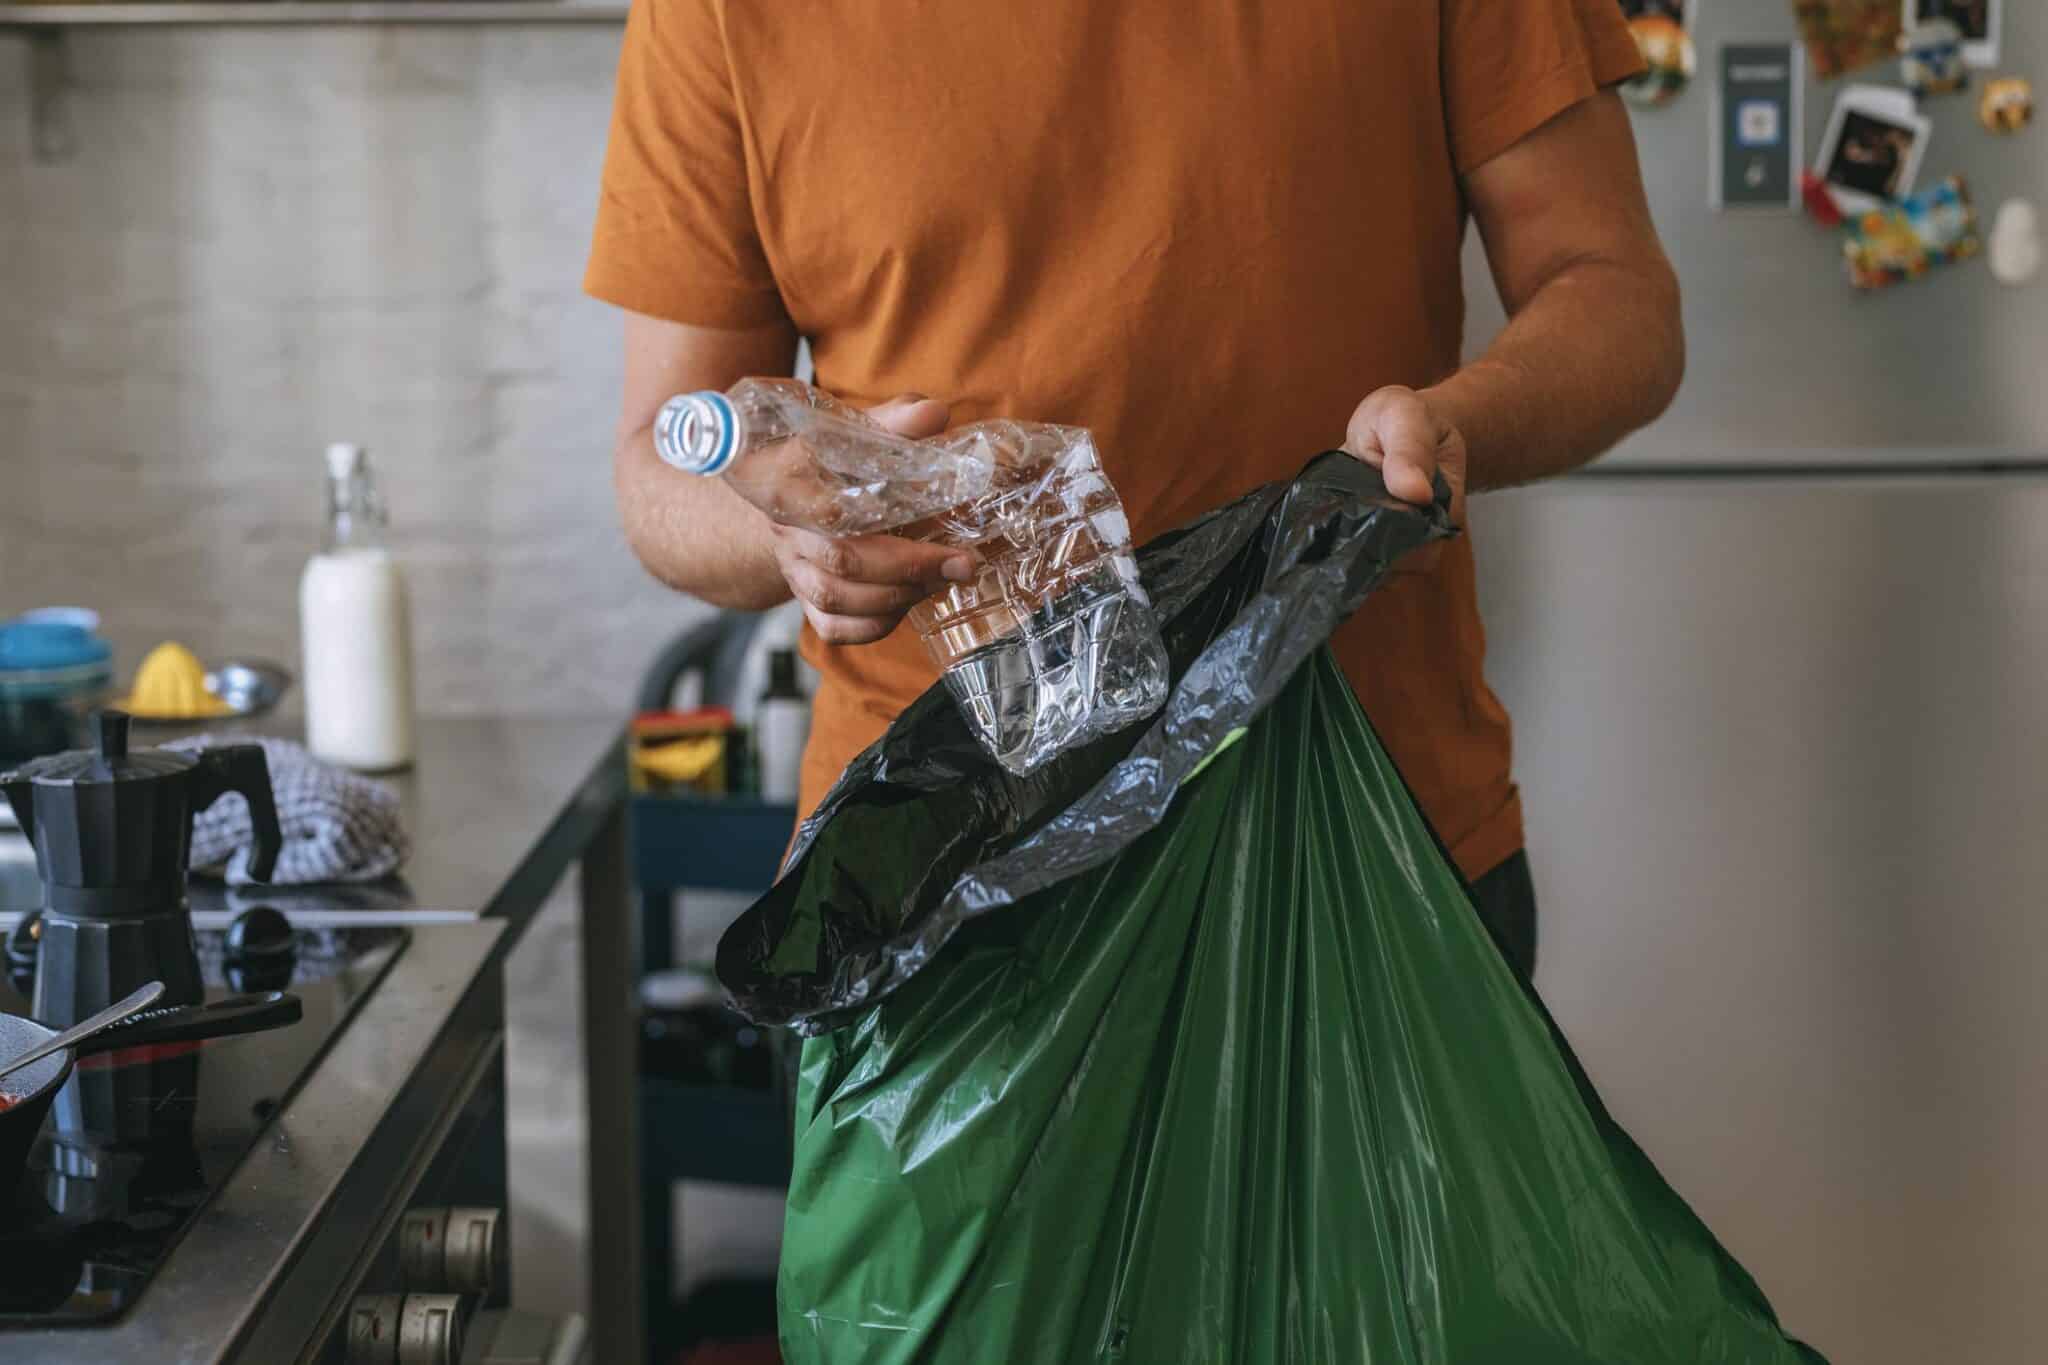 Compostable Tall Kitchen Garbage Bags, 13 Gallon | Free The Ocean